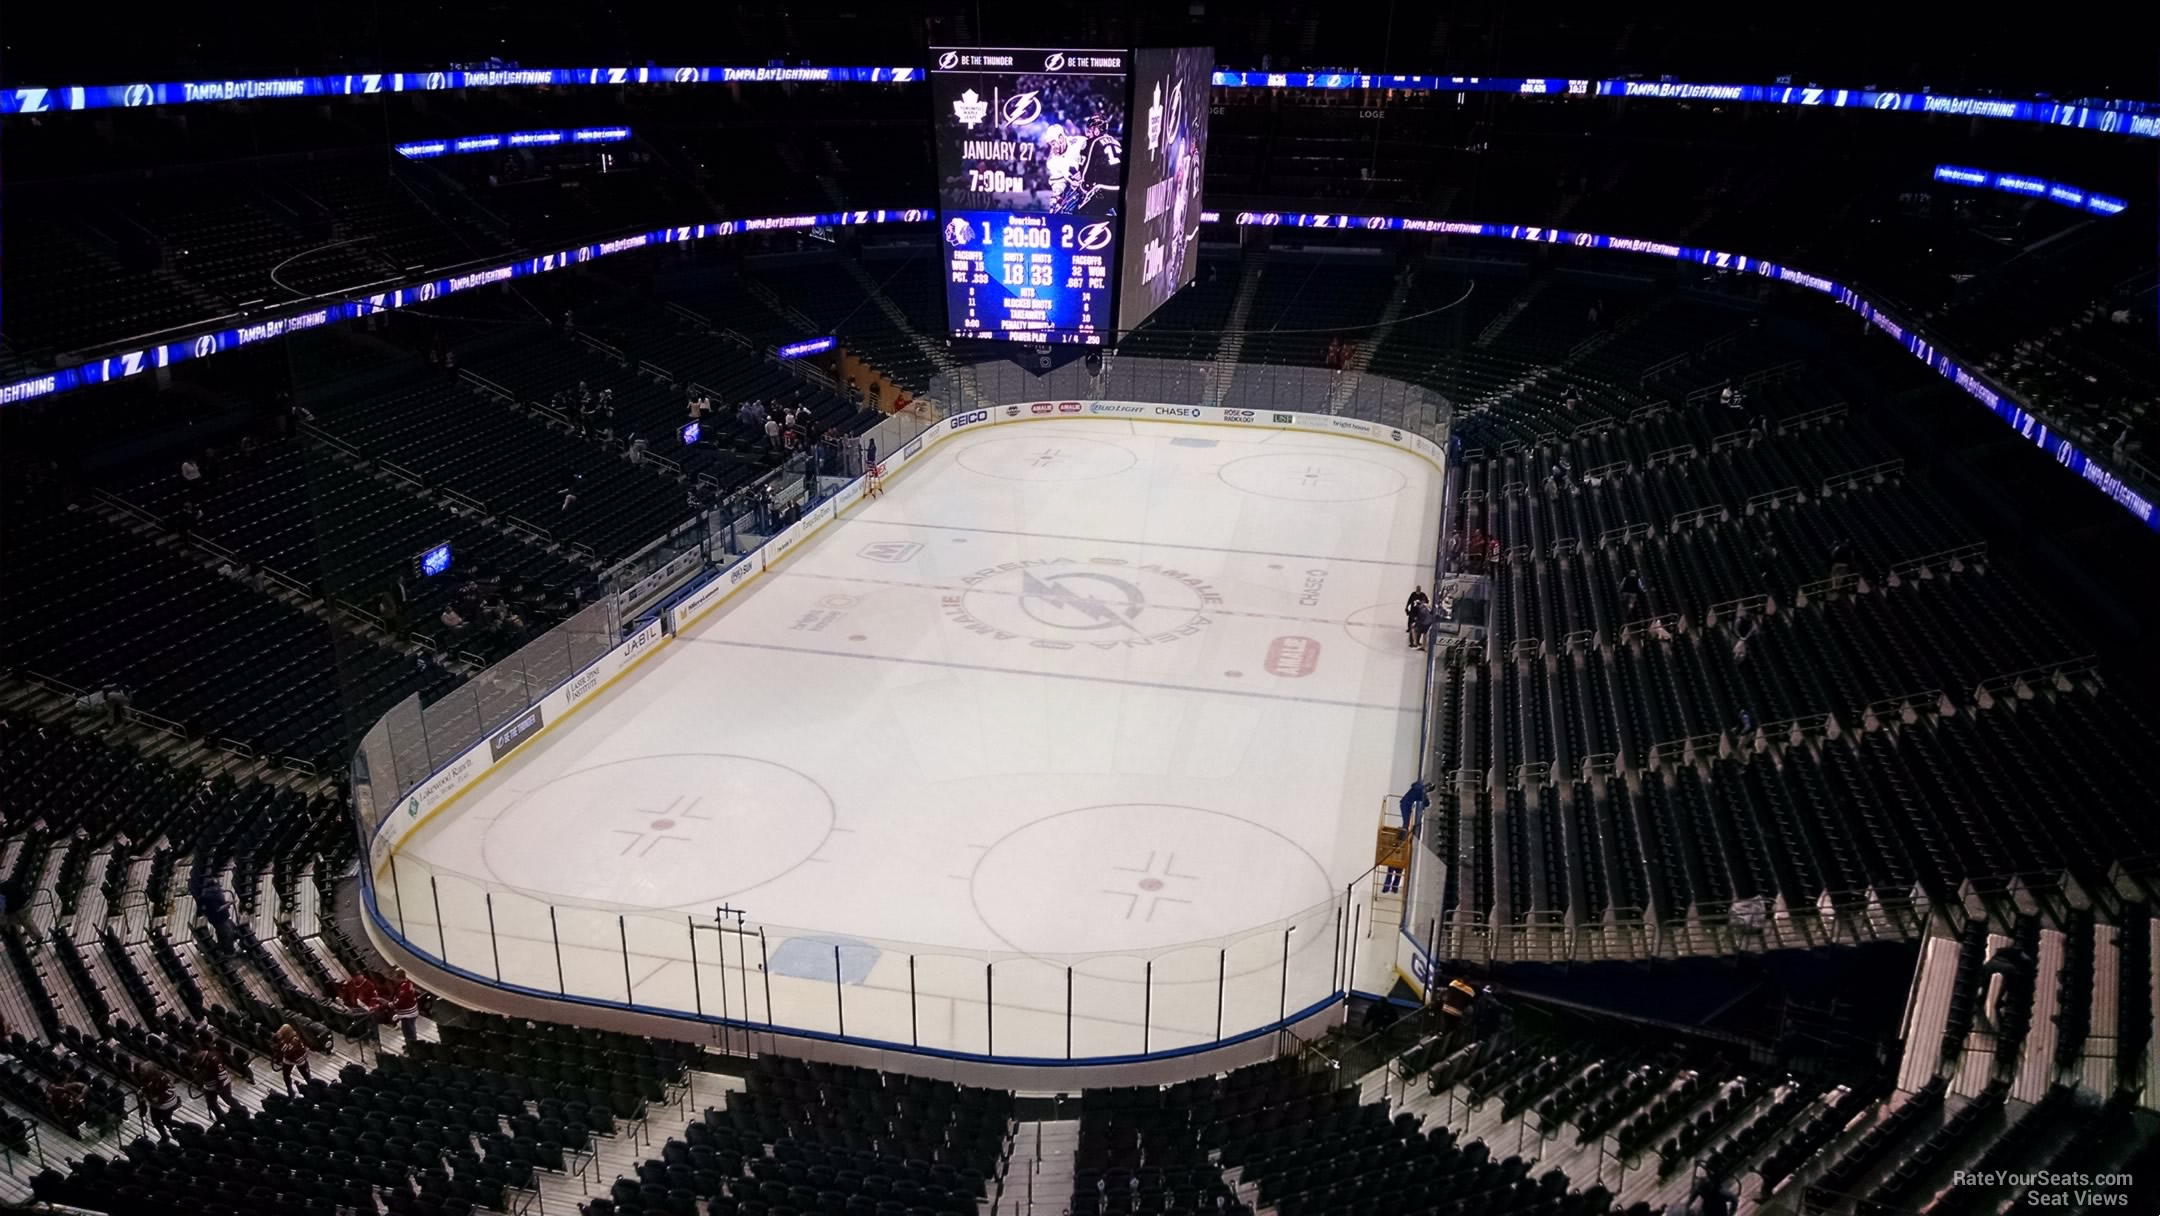 Rink ice from Tampa Bay Lightning's Amalie Arena used in limited